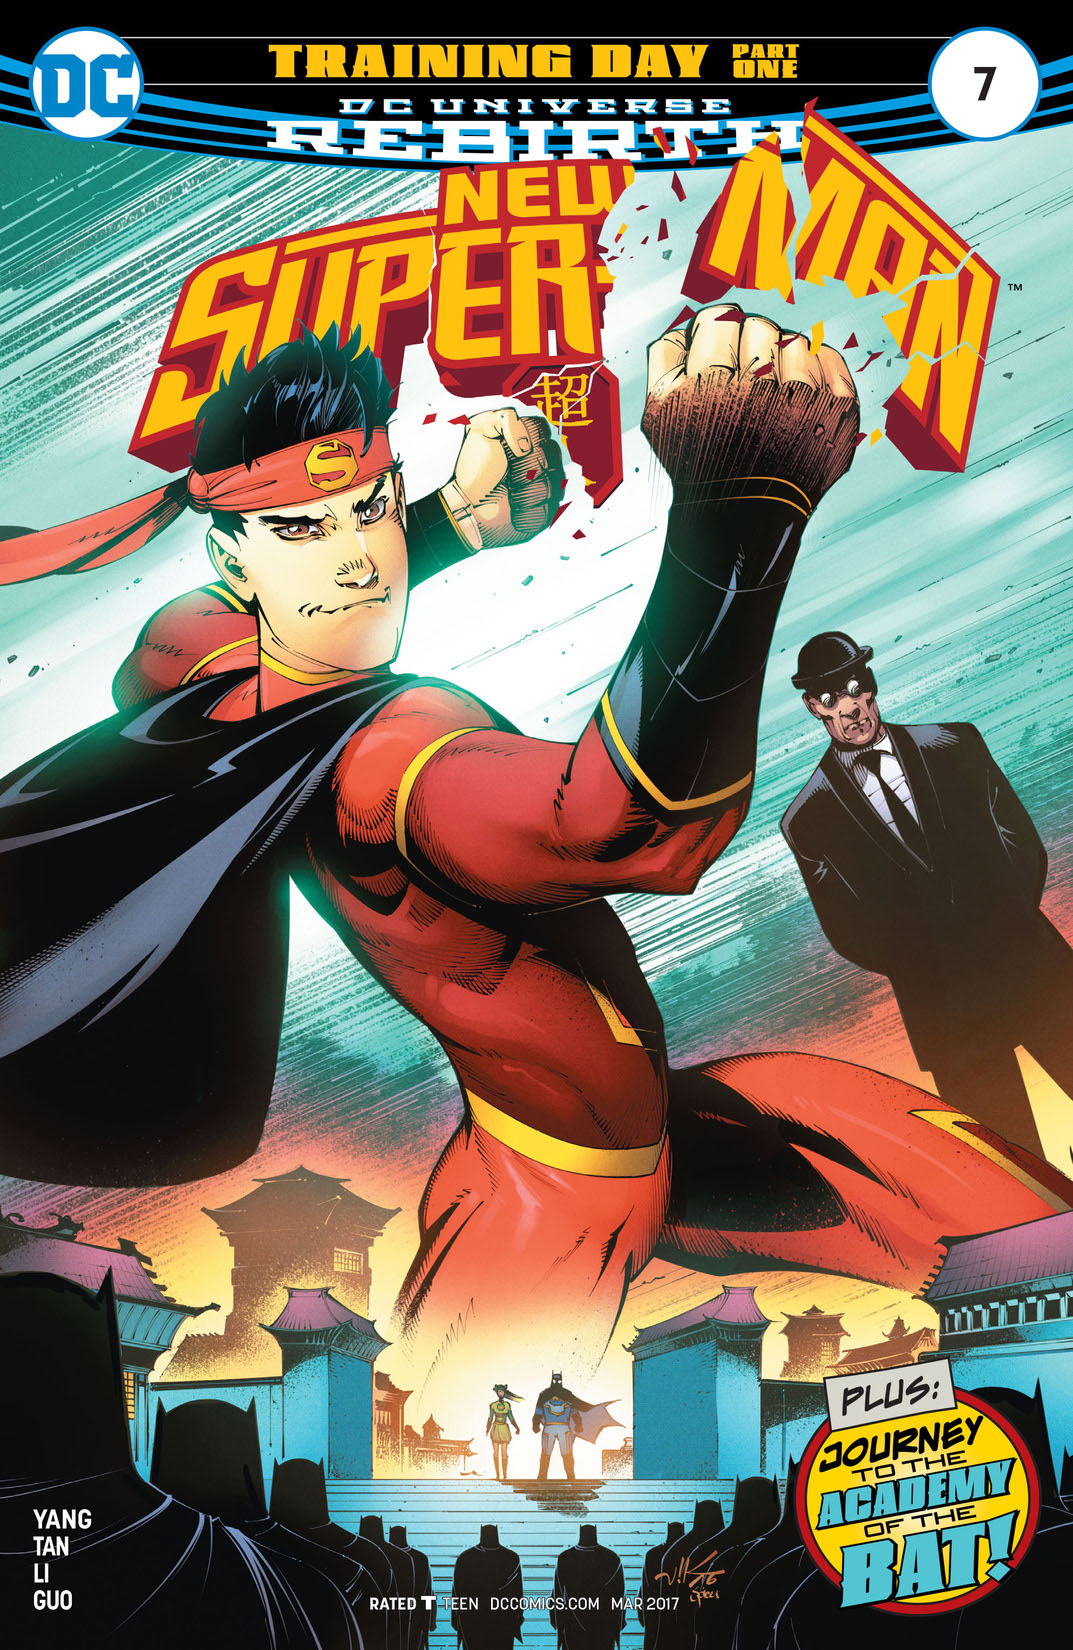 New Super-Man #7 preview images